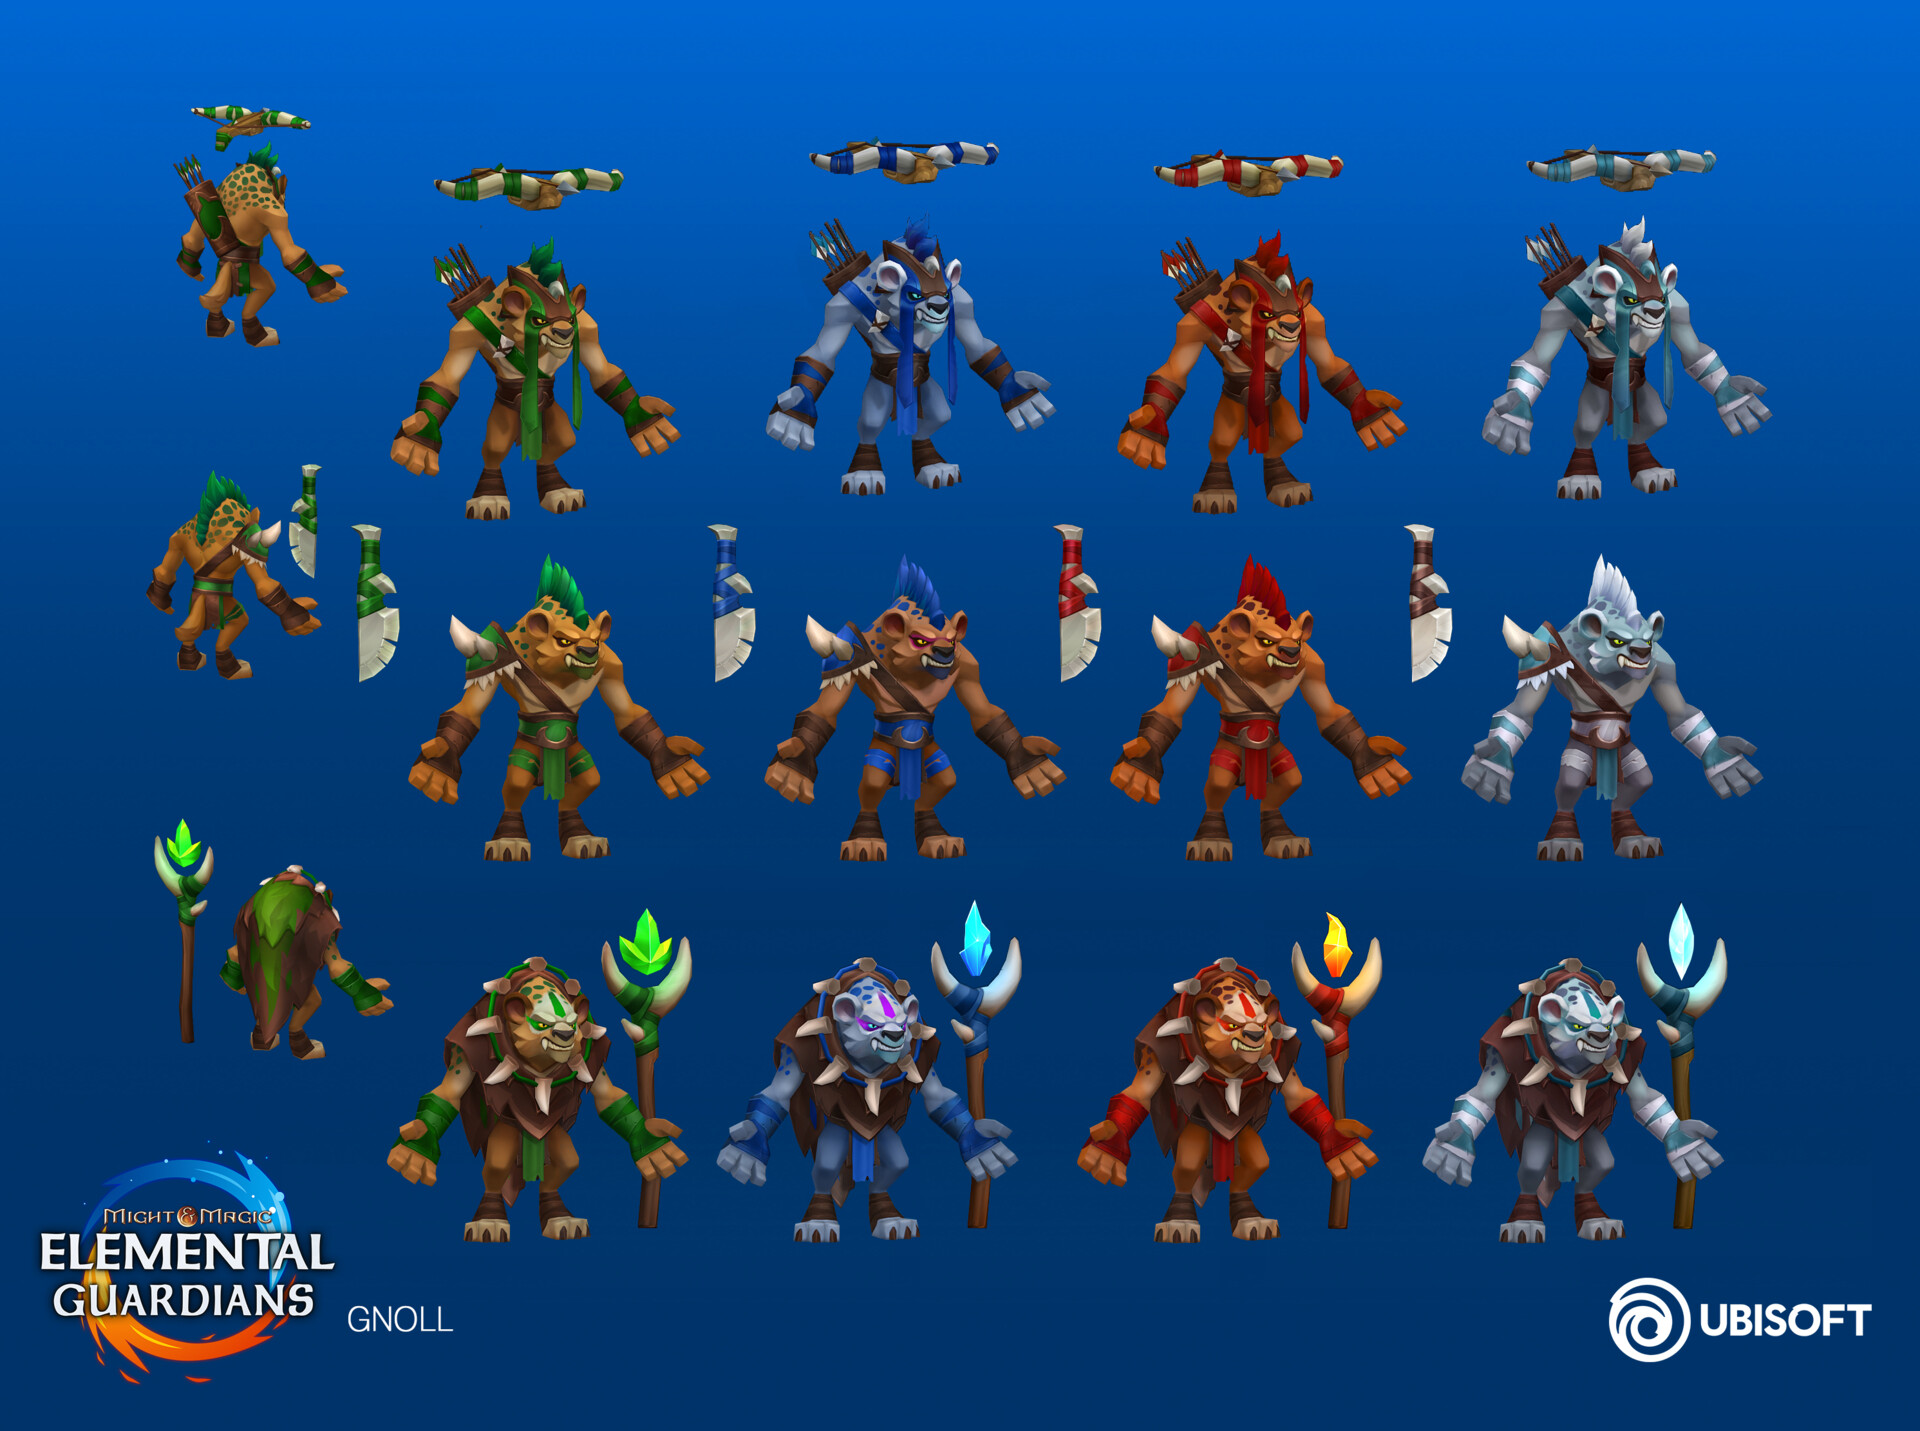 Characters for "Might & Magic: Elemental Guardians.